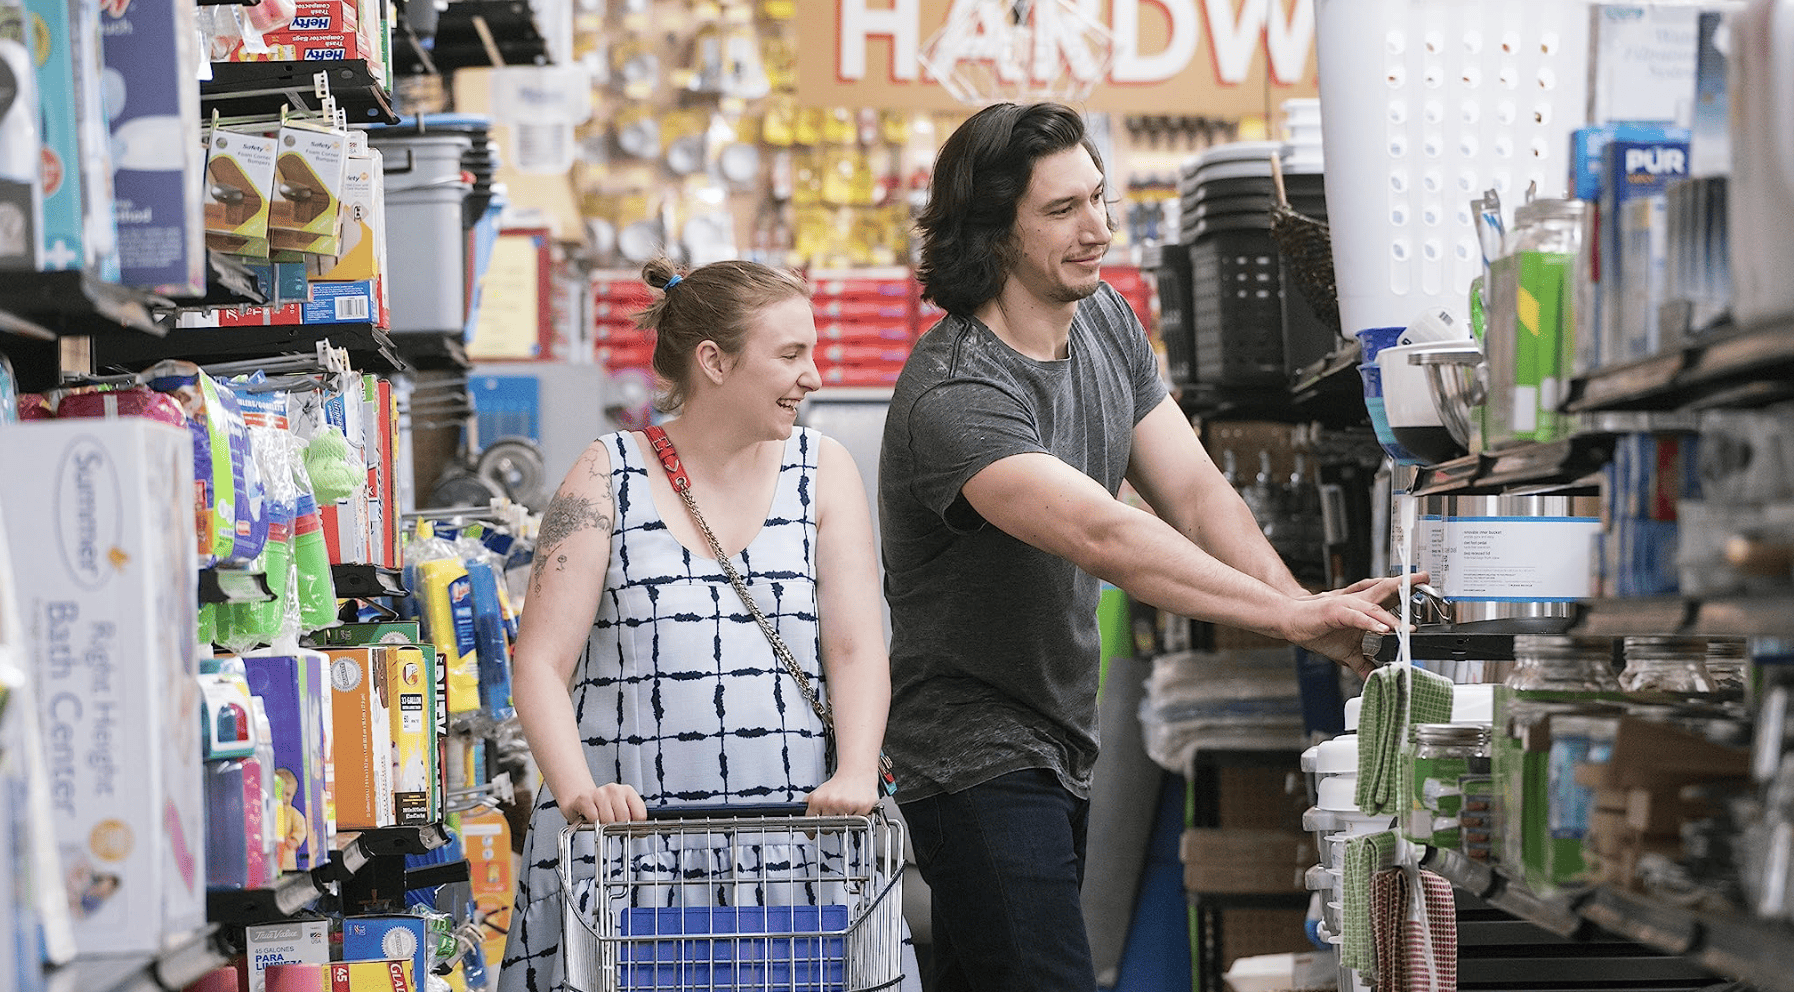 Lena Dunham and Adam Driver shopping together in this image from Apatow Productions